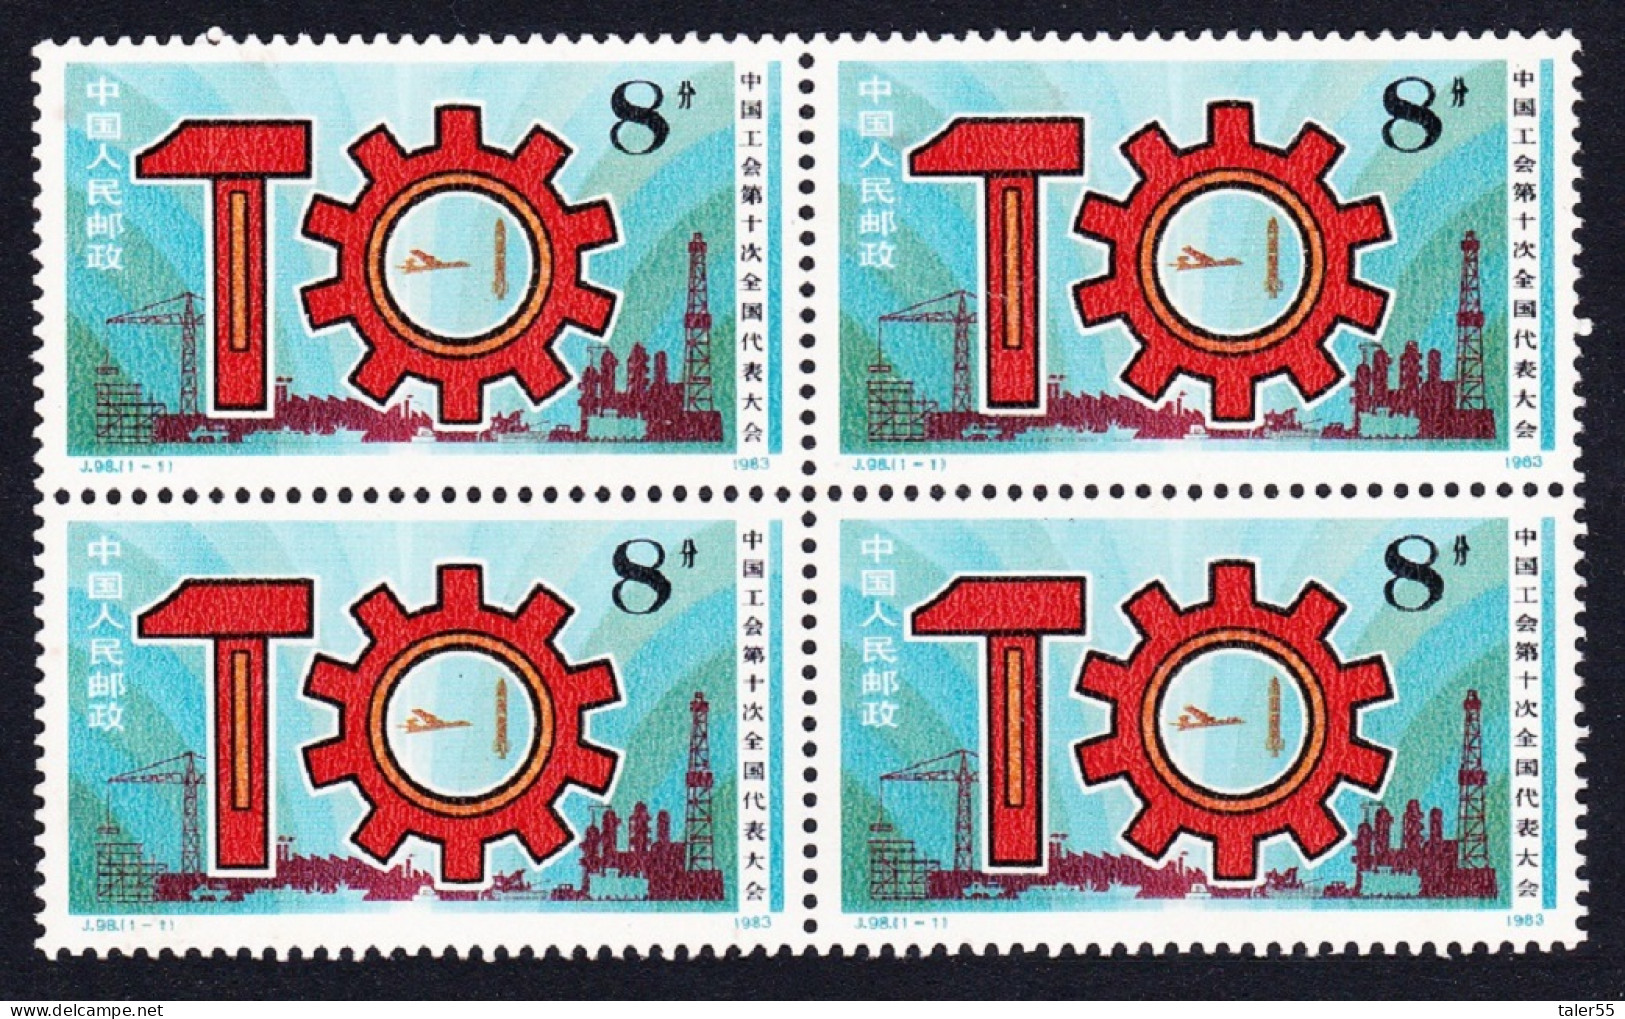 China Trade Union Congress Block Of Four 1983 MNH SG#3282 MI#1905 Sc#1885 - Unused Stamps